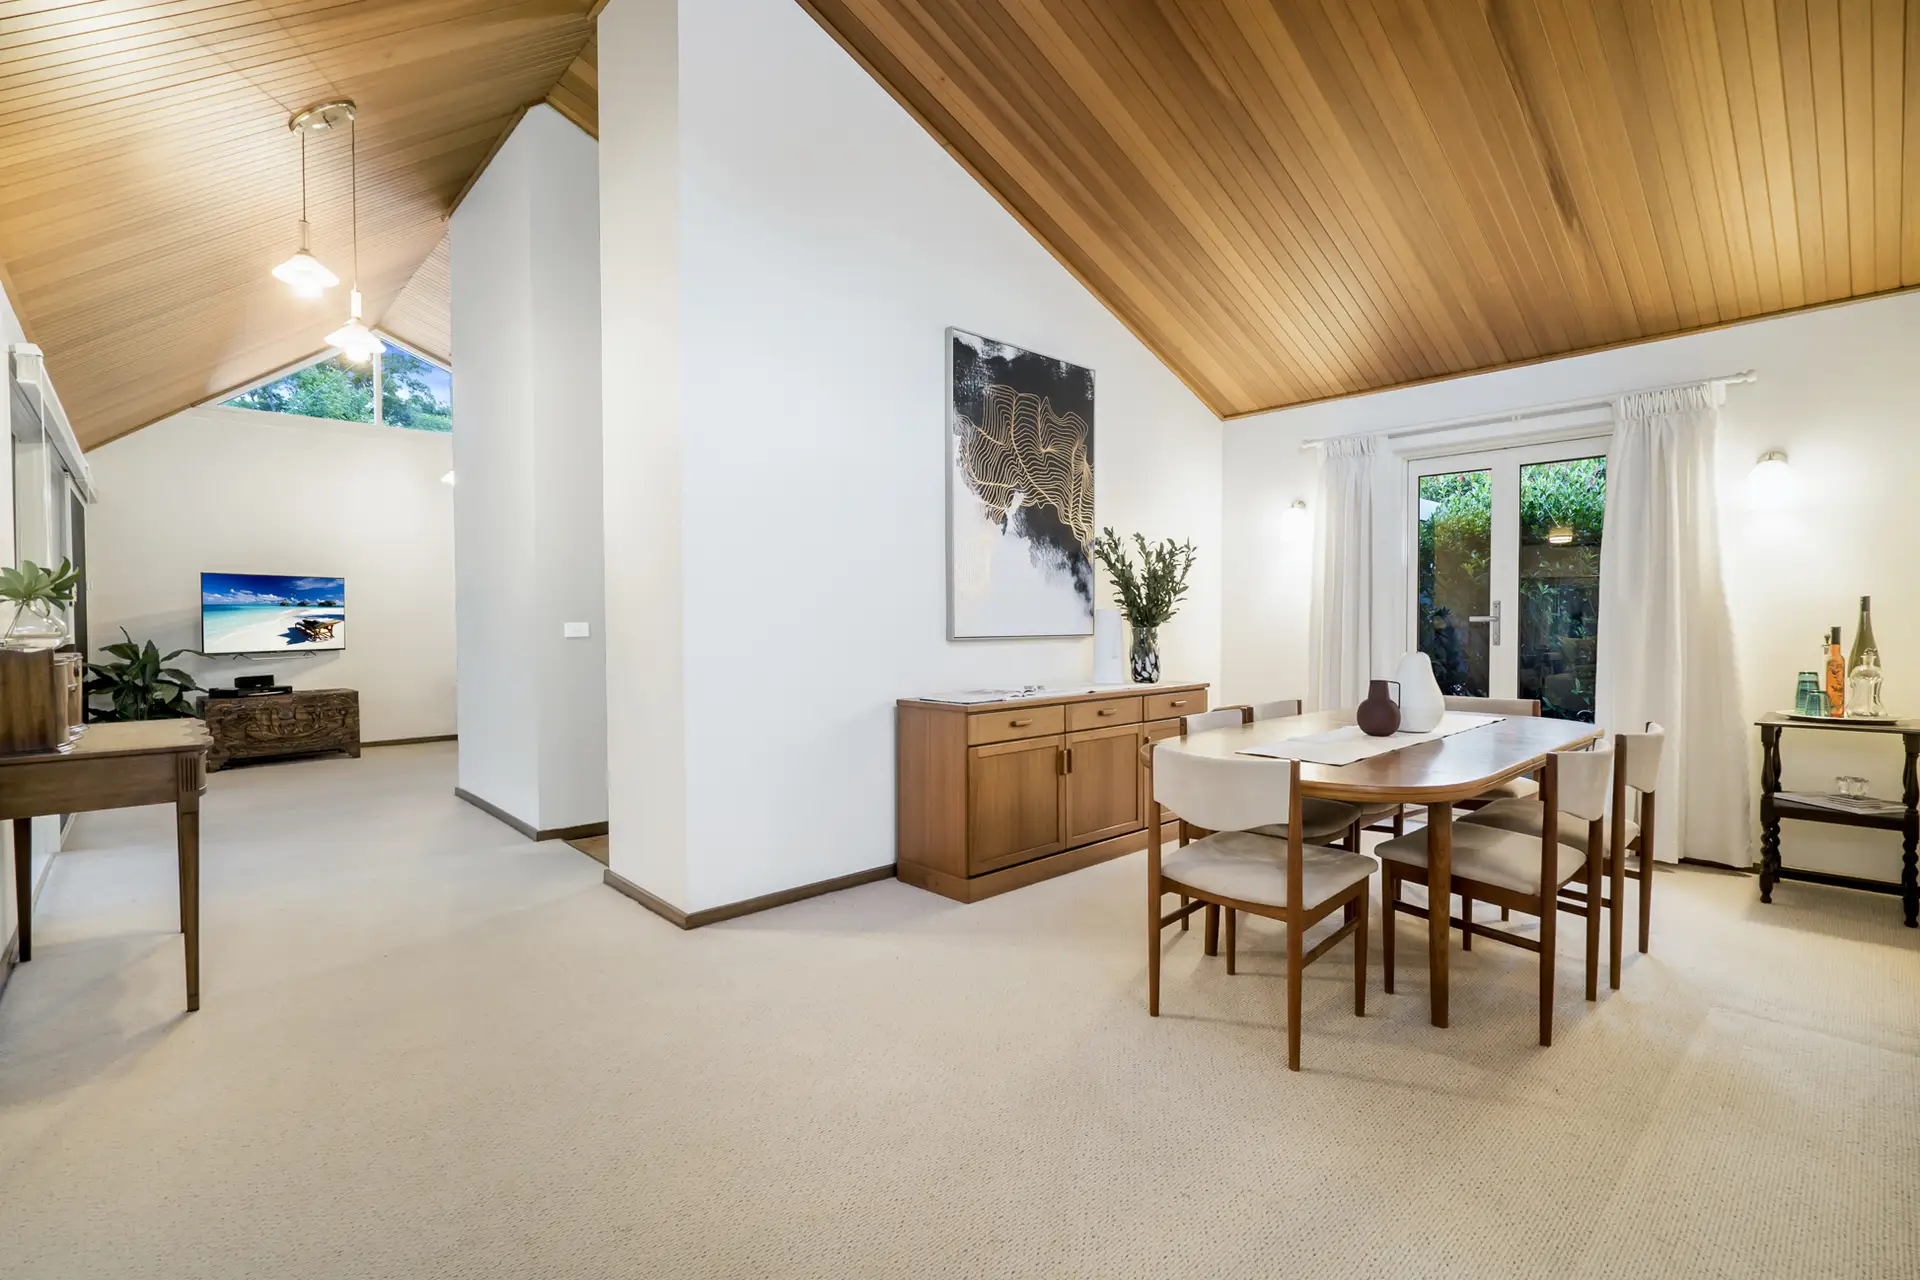 Photo #6: 6 Betts Place, West Pennant Hills - Sold by Louis Carr Real Estate